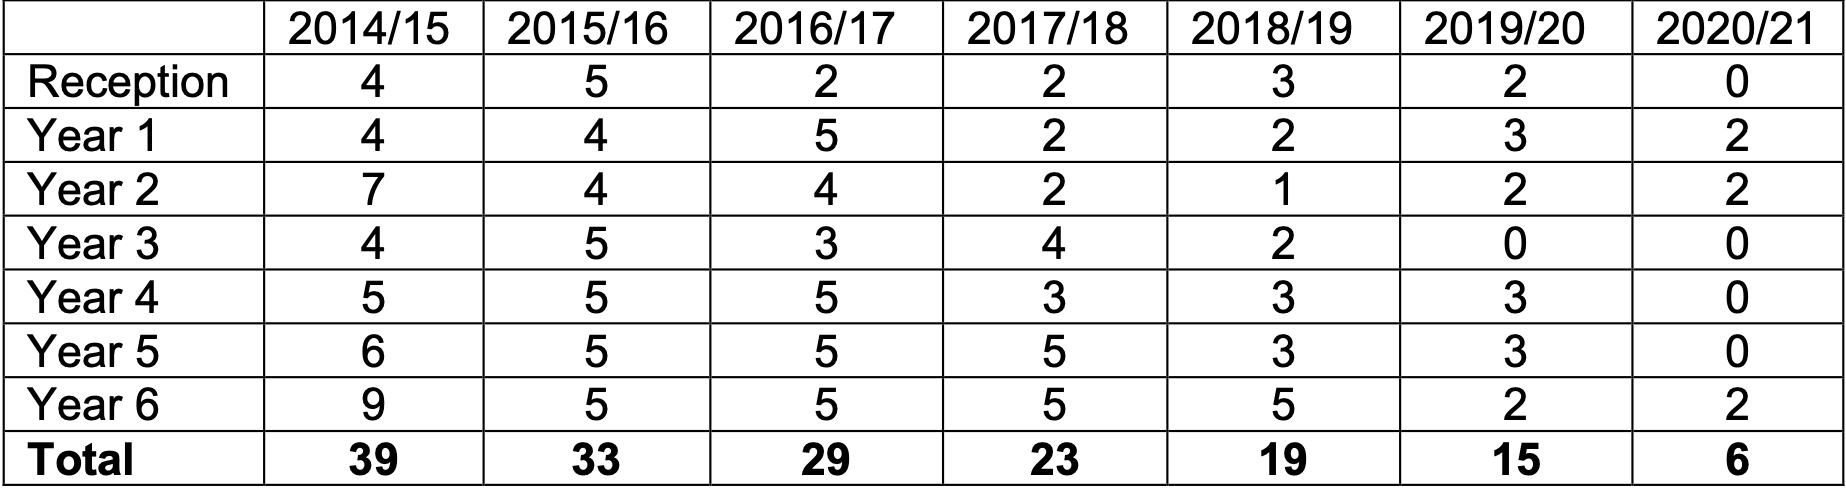 Pupil numbers at Kell Bank Primary School before its closure. Data: NYCC.